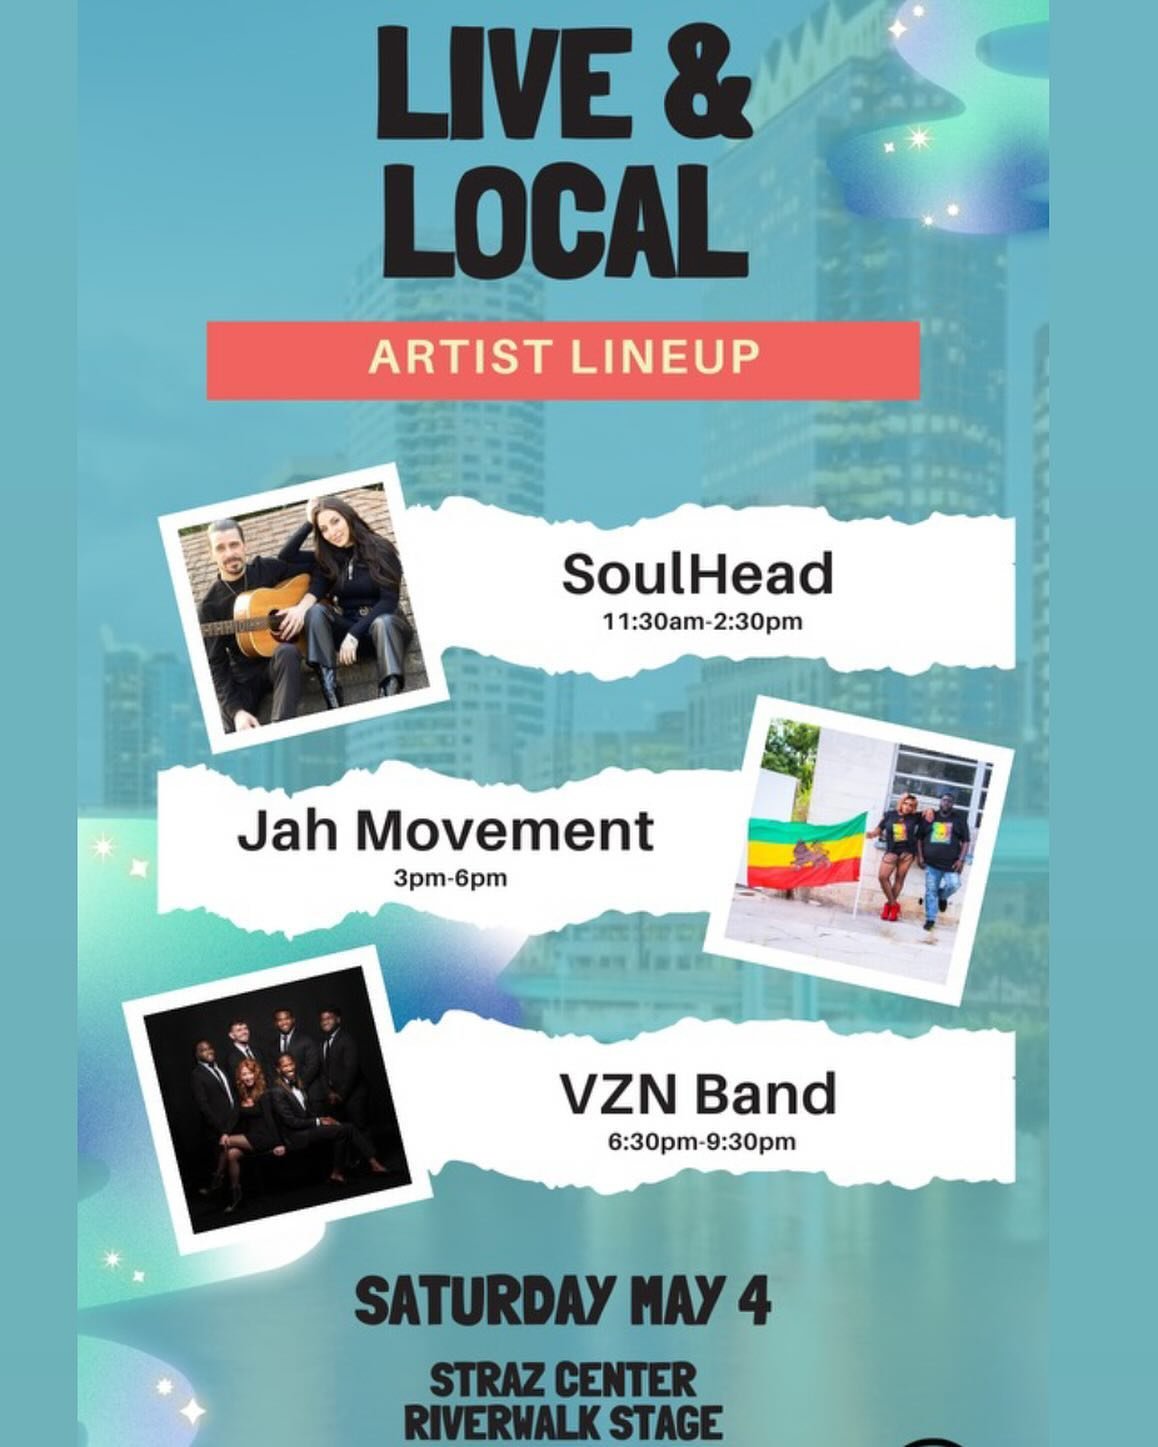 Saturday May 4 at @strazcenter Tampa Riverwalk Stage, join us for some great live music with @soulheadmusic , @jahmovementband ,and the @vznband . 11:30am-9:30pm 🎵

#liveandlocal #riverwalkstage #concert